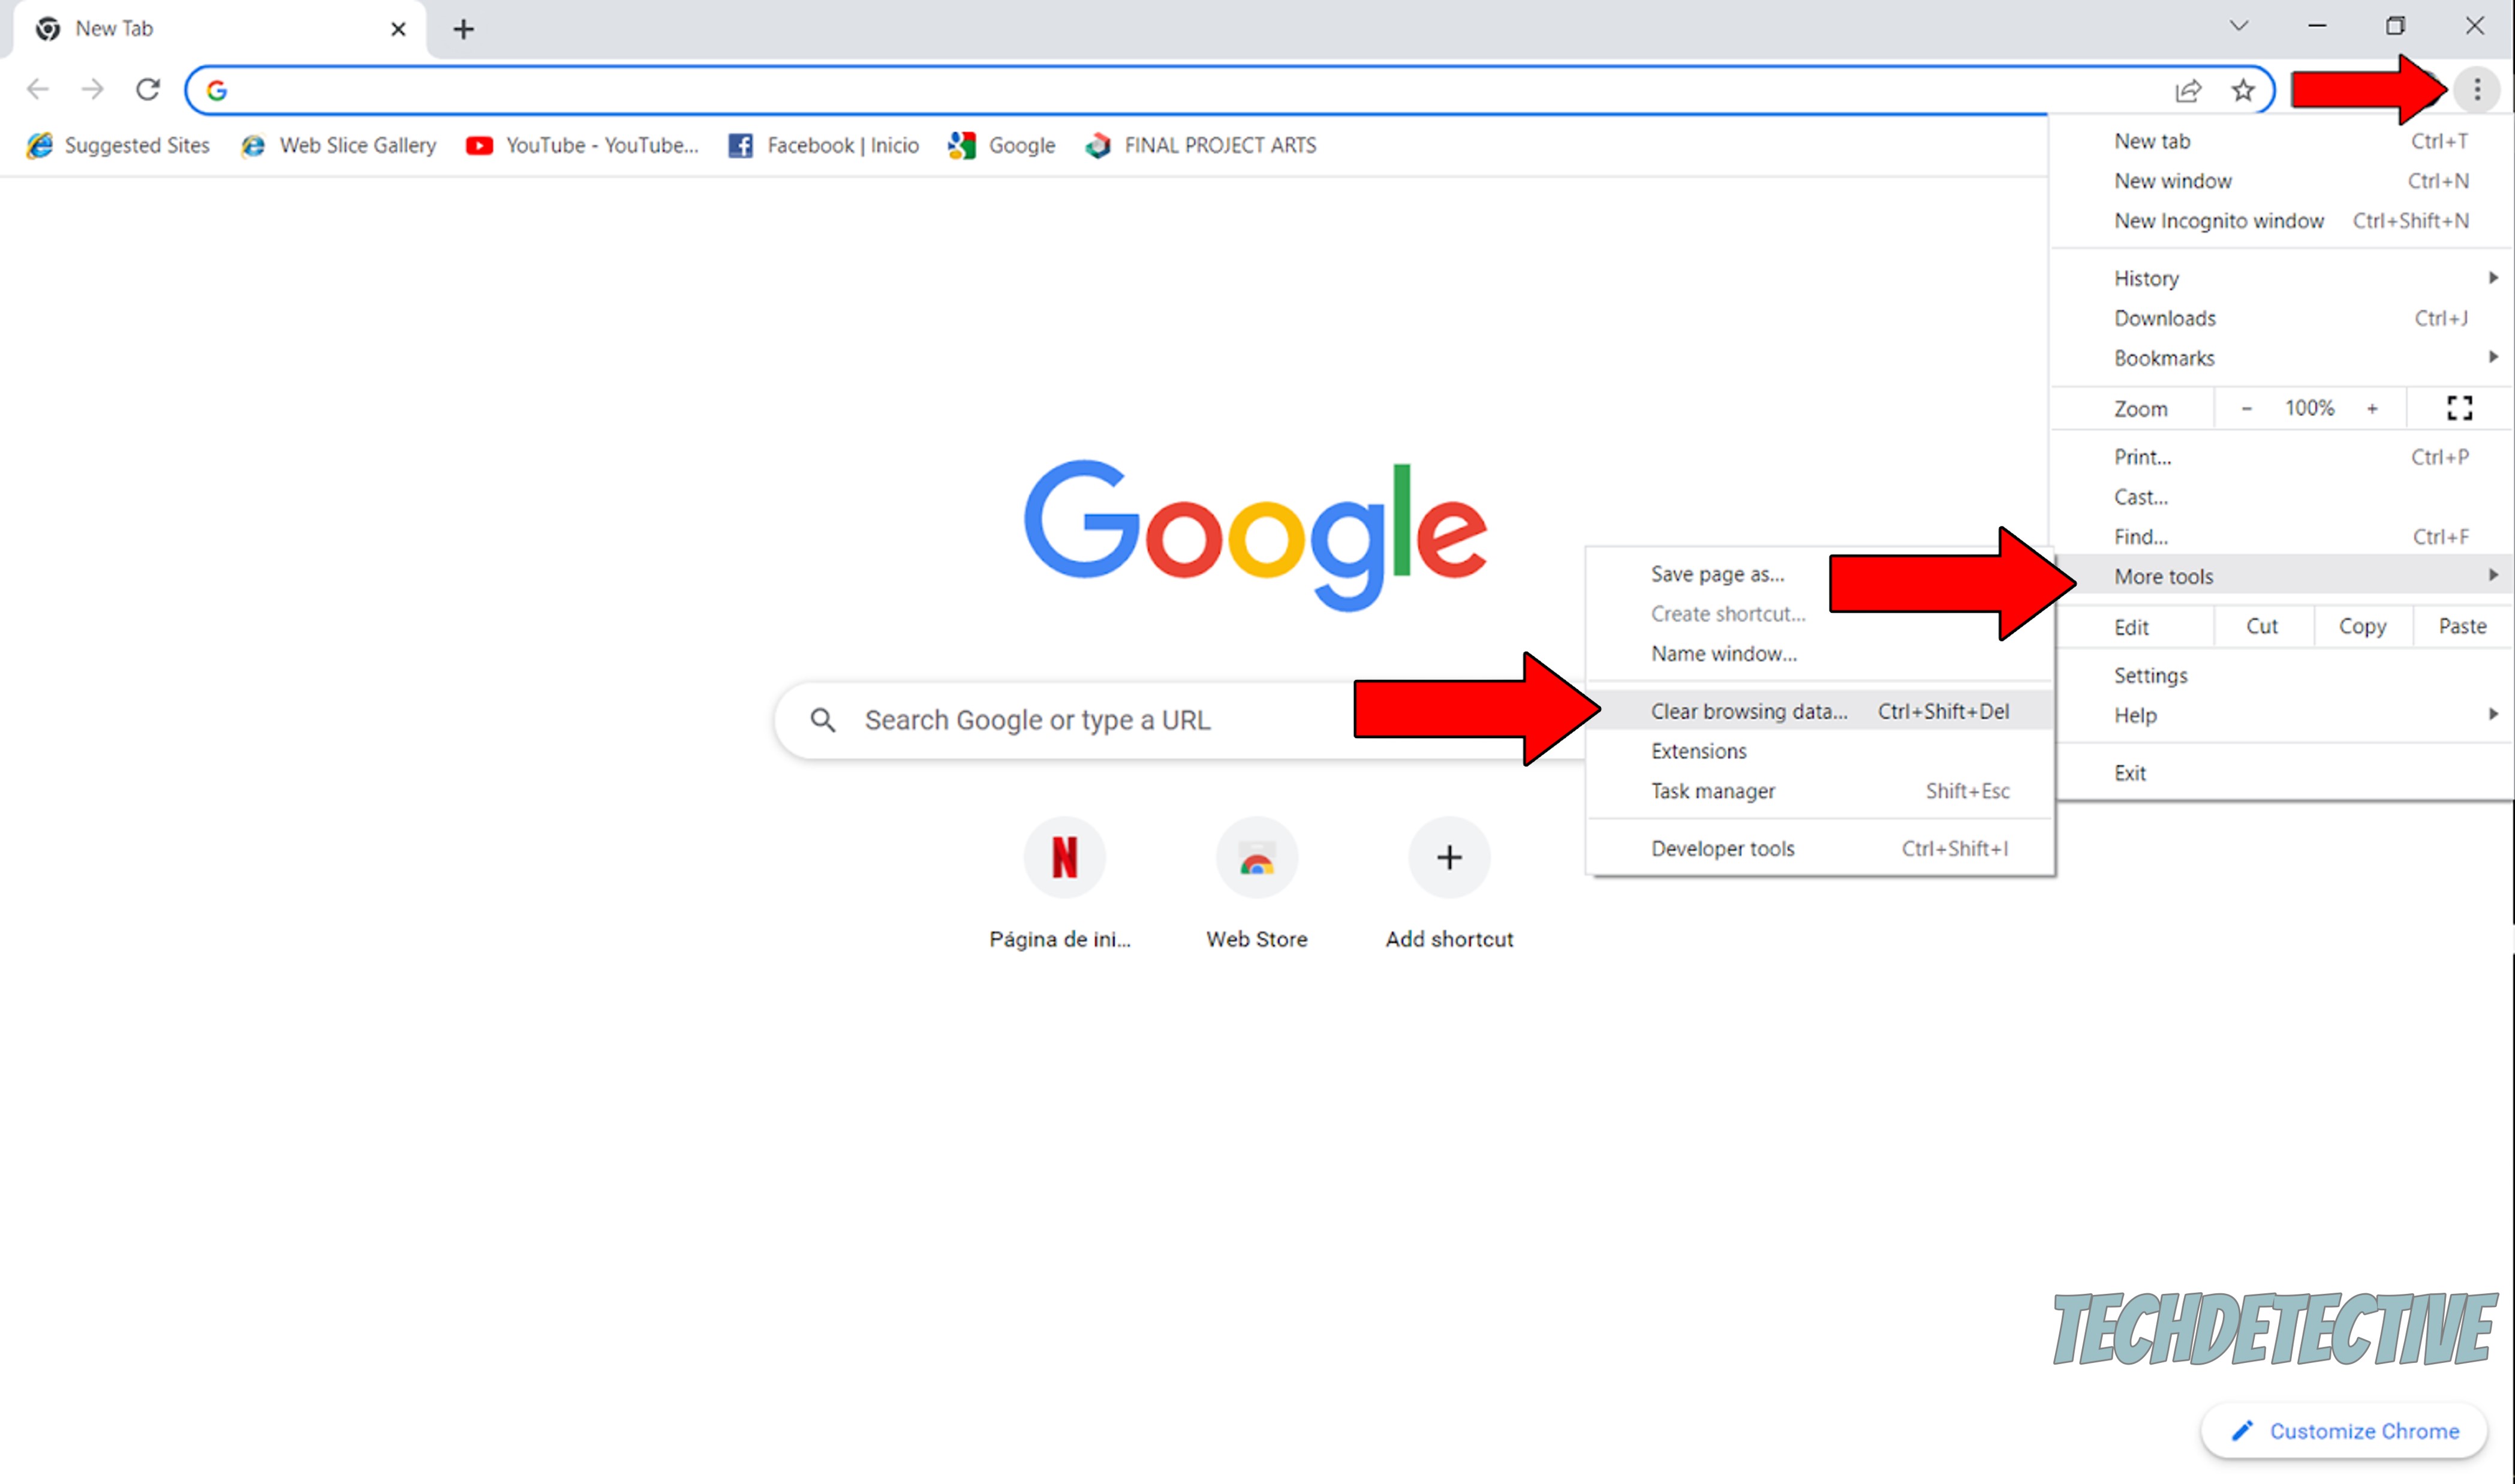 How to clear cookies on Google Chrome